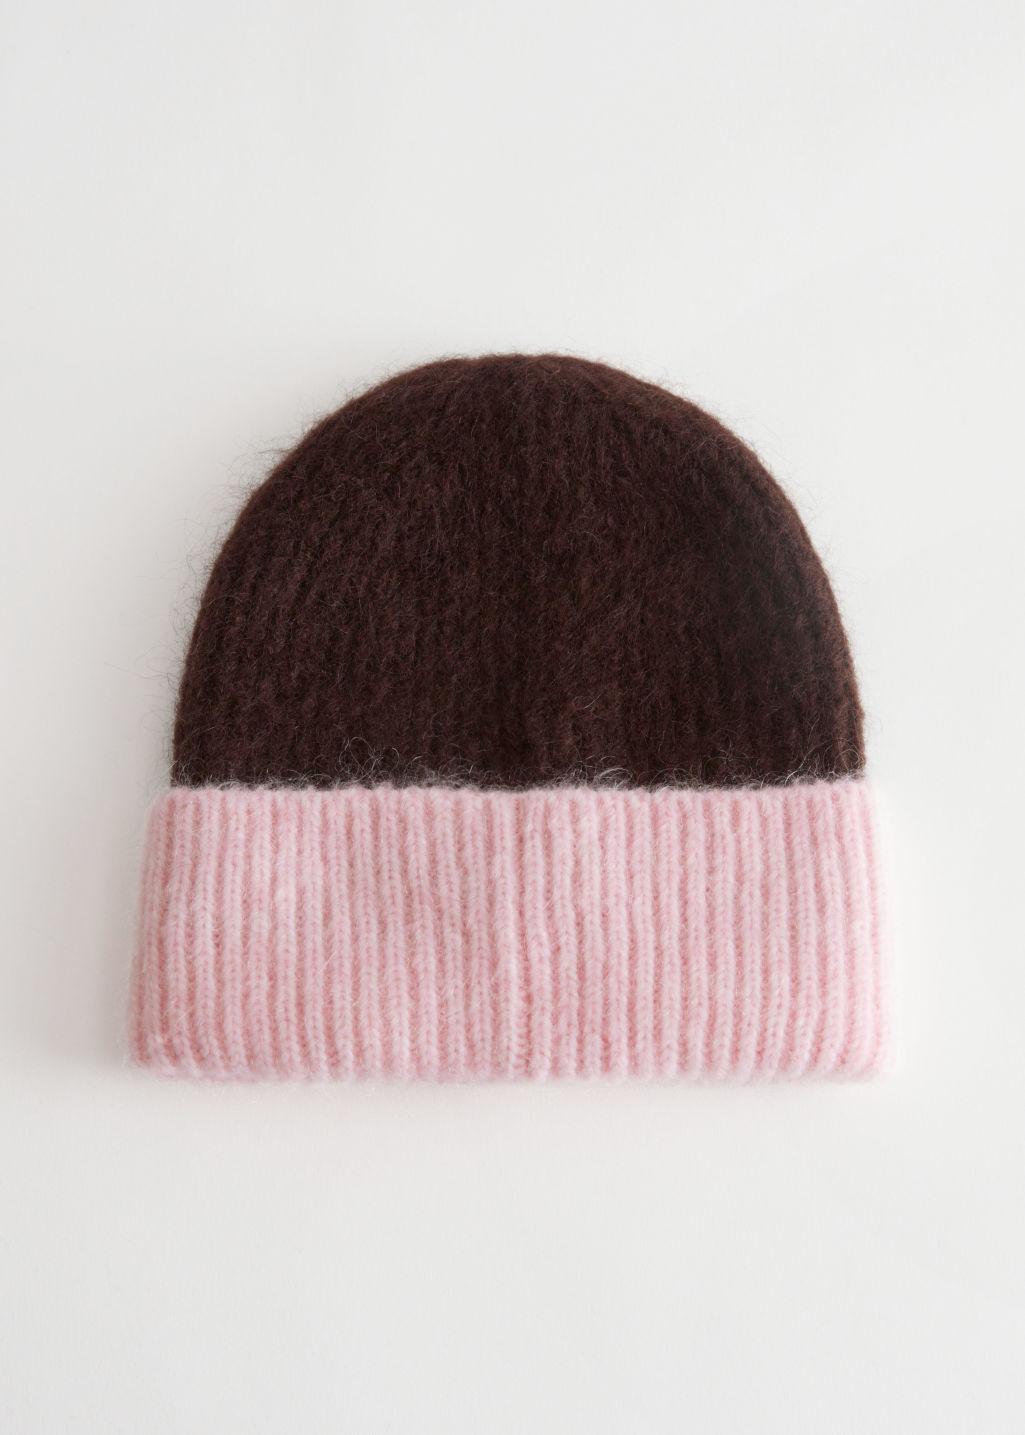 & Other Stories Ribbed Mohair Blend Beanie in Pink | Lyst